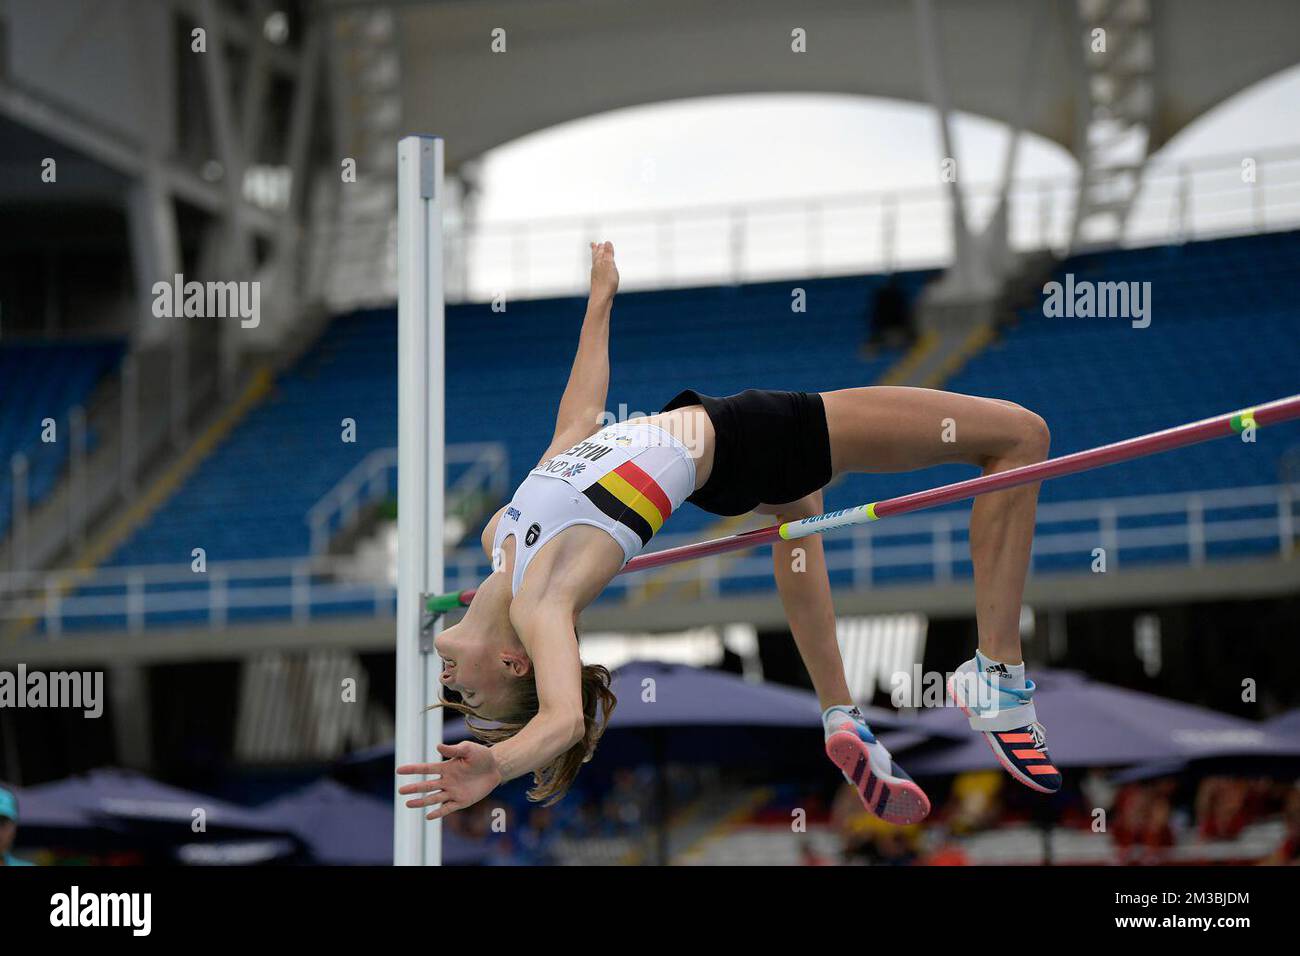 Belgian Merel Maes pictured in action during the high jump event, at the 'World Athletics' World Junior Athletics Championships, on Saturday 06 August 2022 in Cali, Columbia. The World U20 Championships take place from August 1st until August 6th 2022. BELGA PHOTO THOMAS WINDESTAM Stock Photo